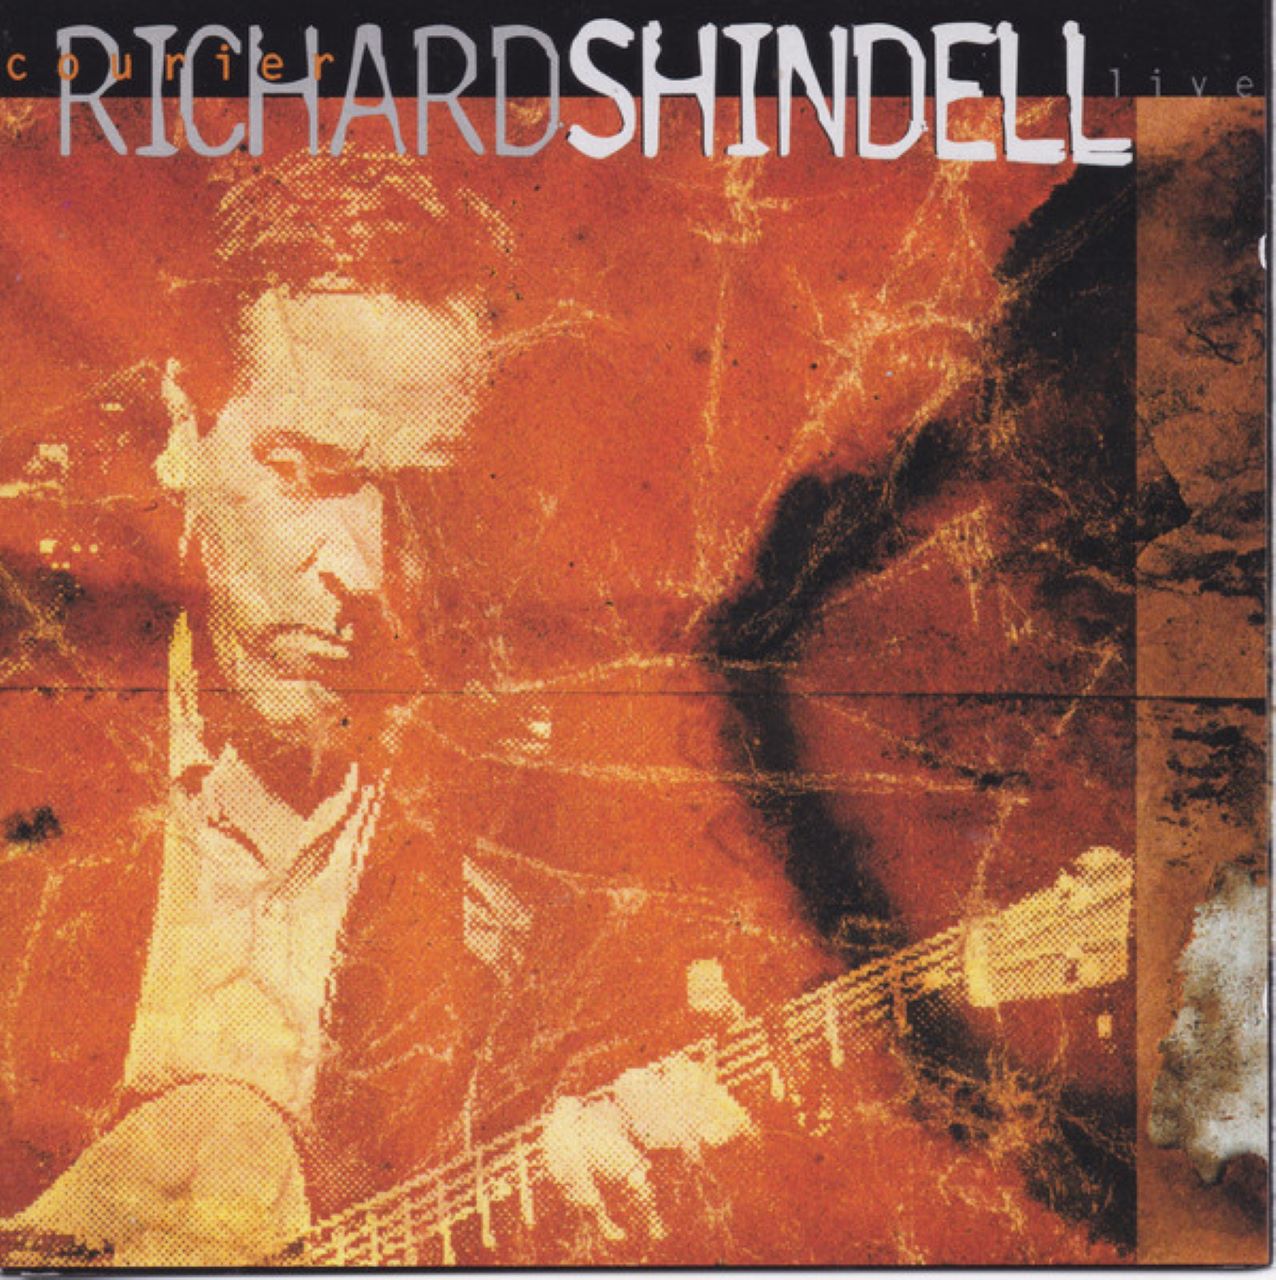 Richard Shindell - Courier cover album